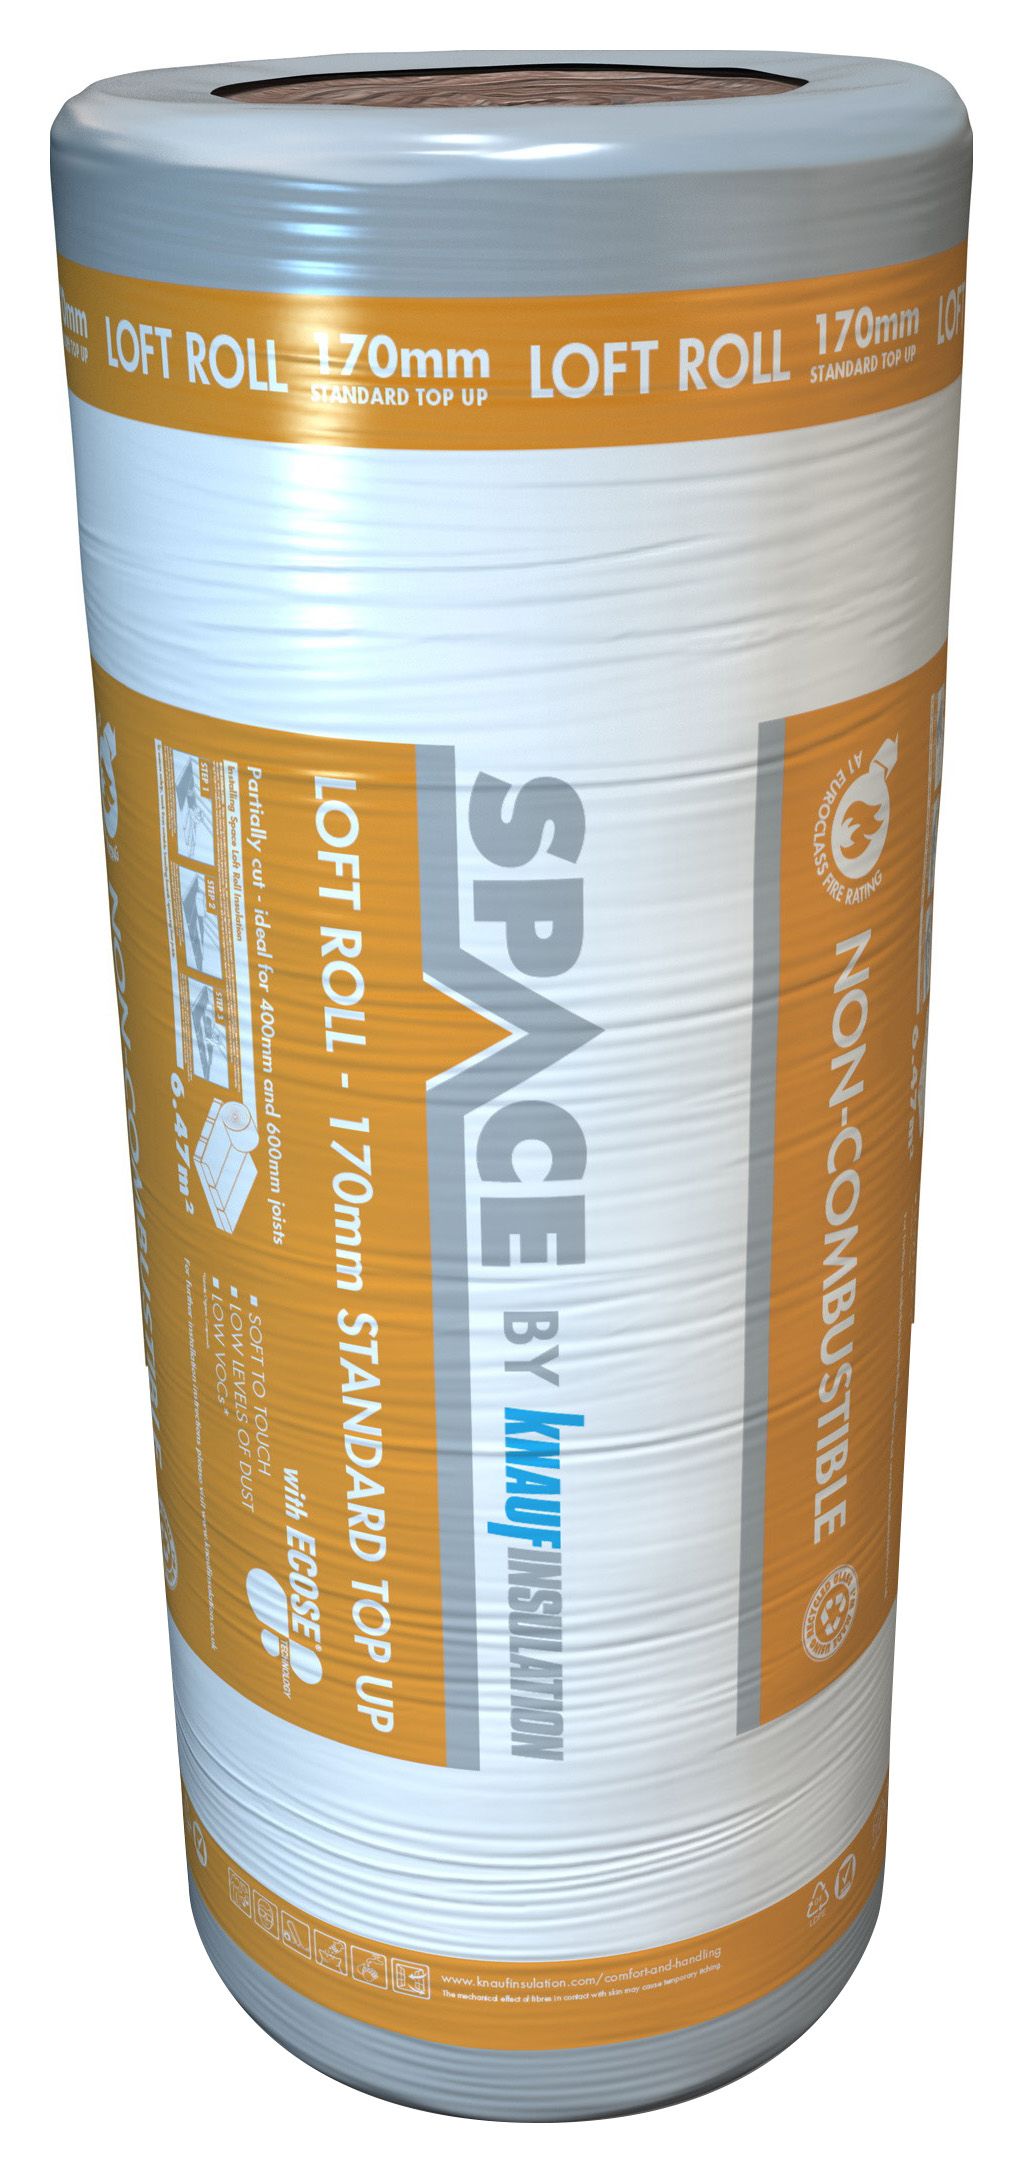 Image of Knauf Insulation Space Standard Top Up 170mm Loft Roll - 6.47m²